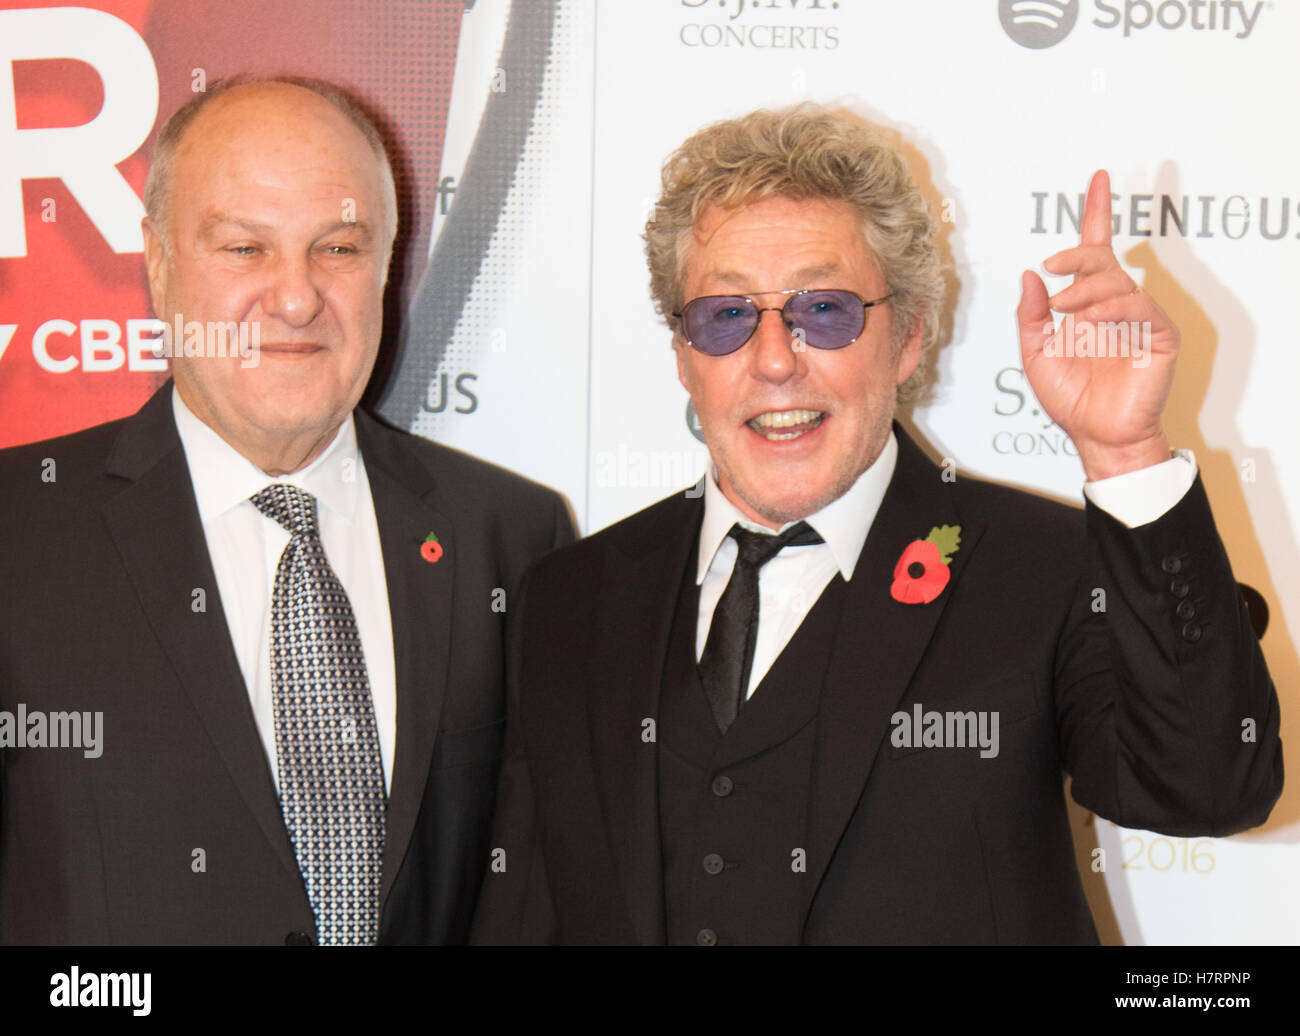 Grosvenor House Hotel, London, November 7th 2016. Luminaries from the music industry gather at the Grosvenor House Hotel for the Music Industry Awards, where this year The Who's Roger Daltrey CBE is honored with the 25th annual MITS award in support of Nordoff Robbins and The BRIT Trust. PICTURED: Harvey Goldsmith and Roger Daltrey Credit:  Paul Davey/Alamy Live News Stock Photo